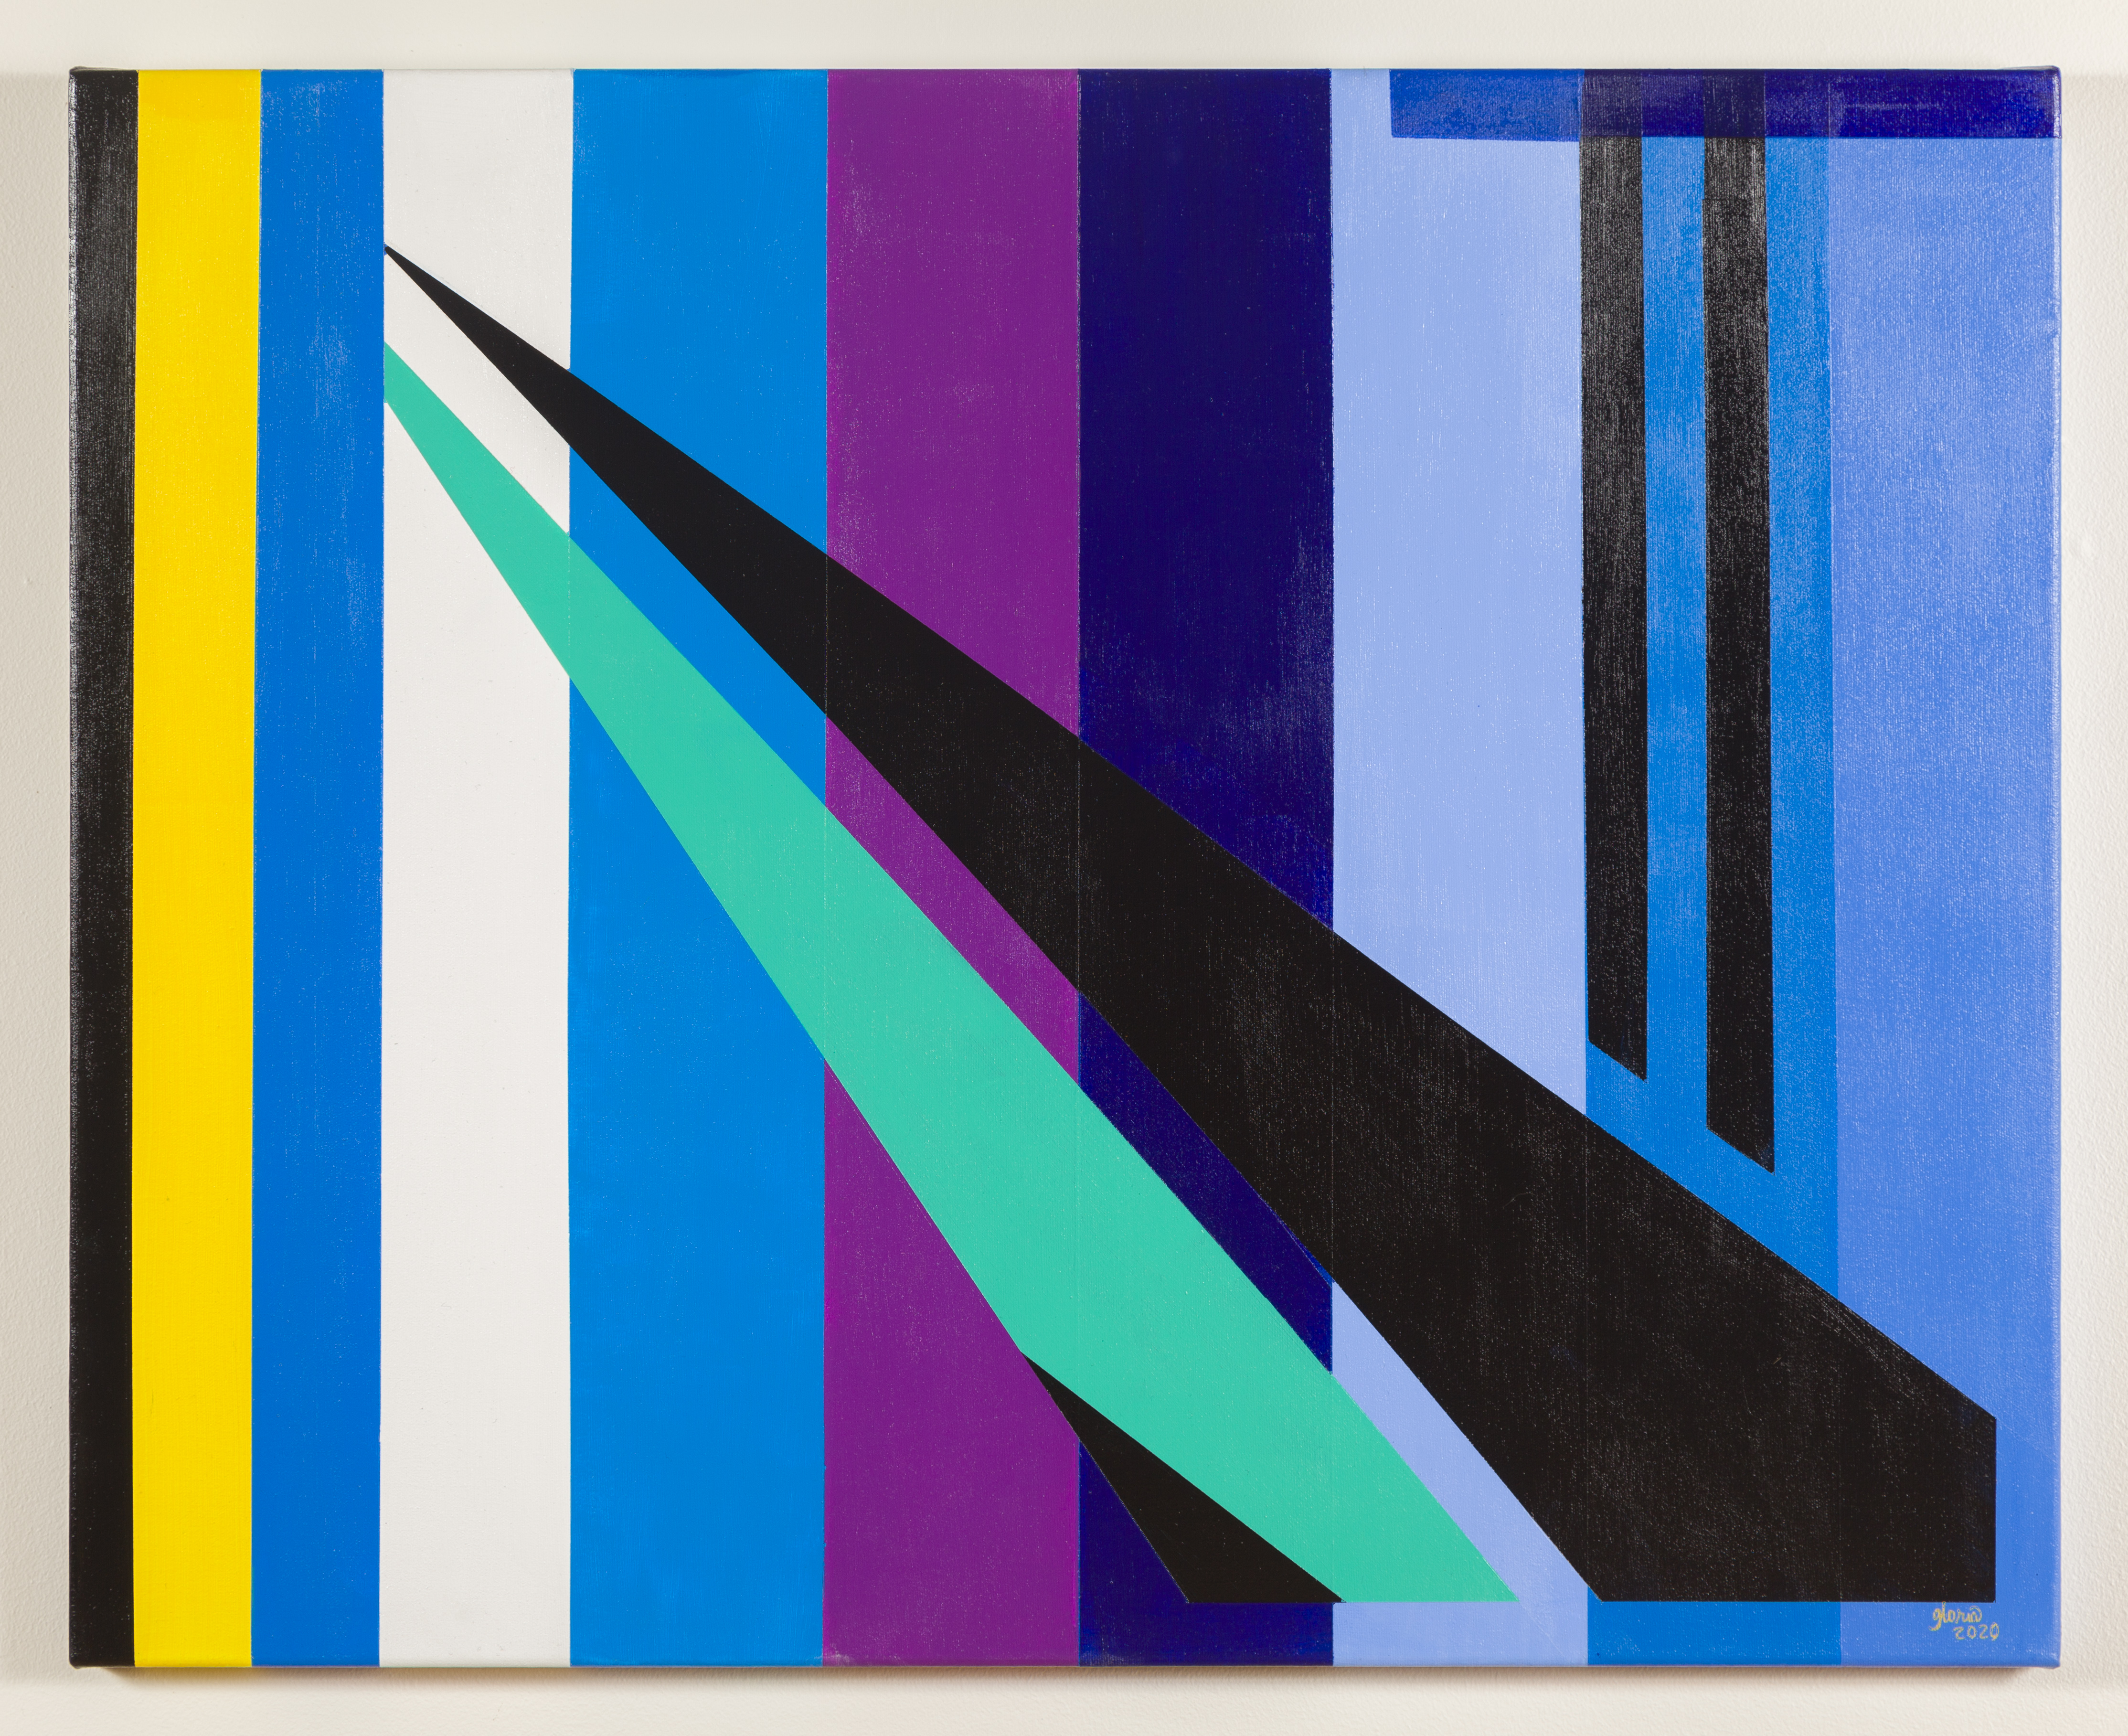 Painting composition consisting of a background of vertical colour bands of blues and purples with two shapes in the foreground diagonally crossing the background